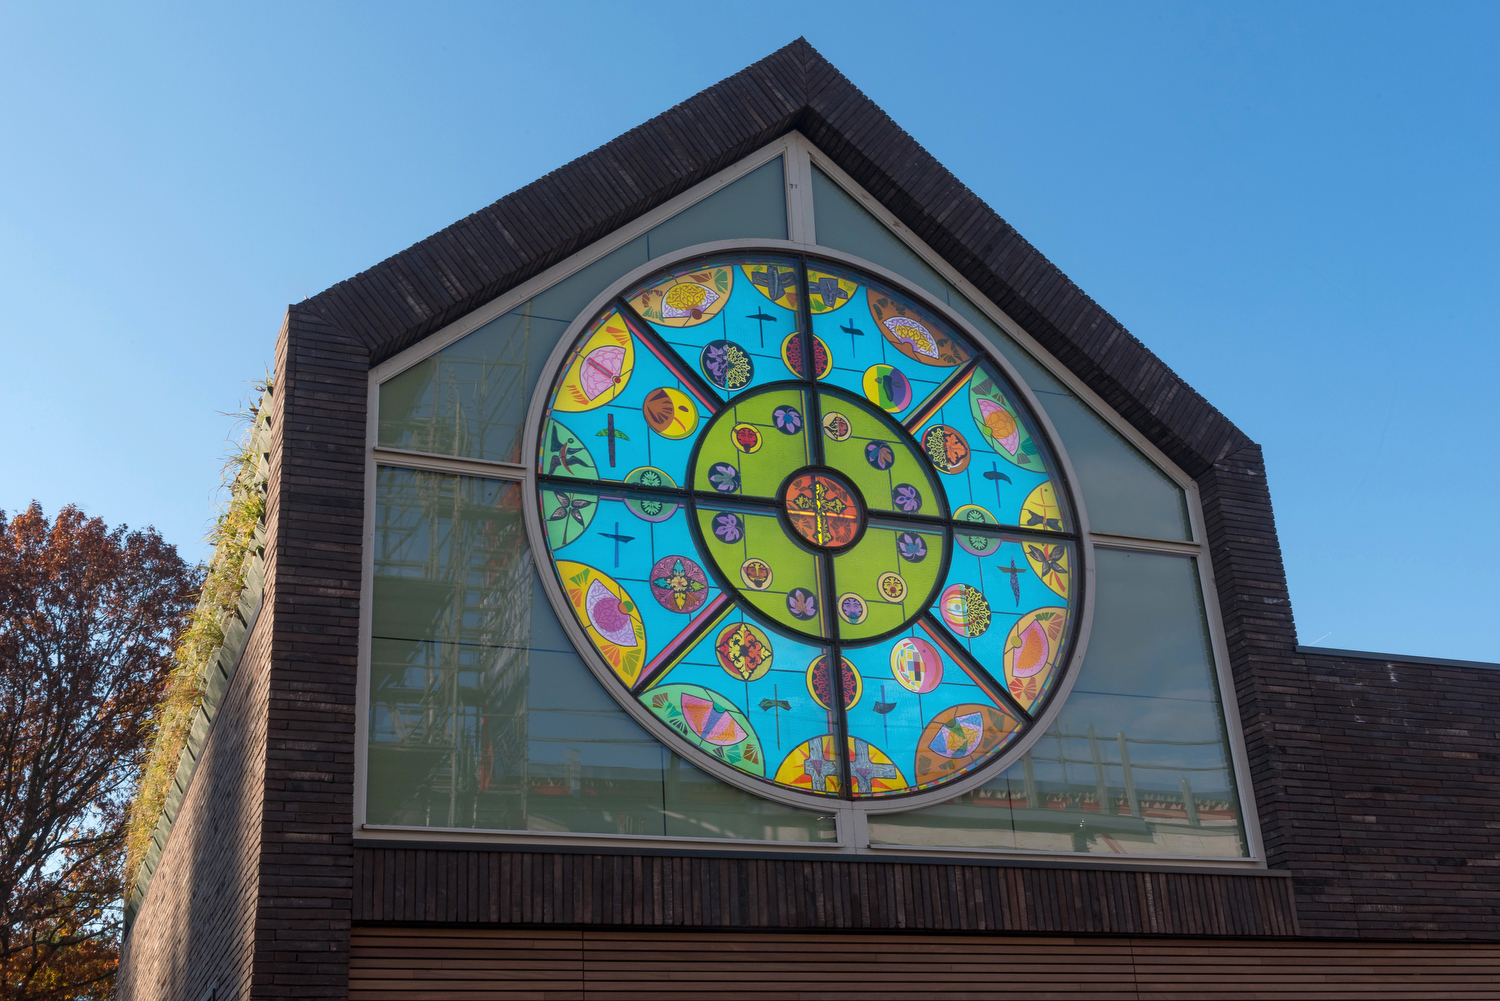 Unique stained glass window designed for the BioMakery at the Koningshoeven Abbey